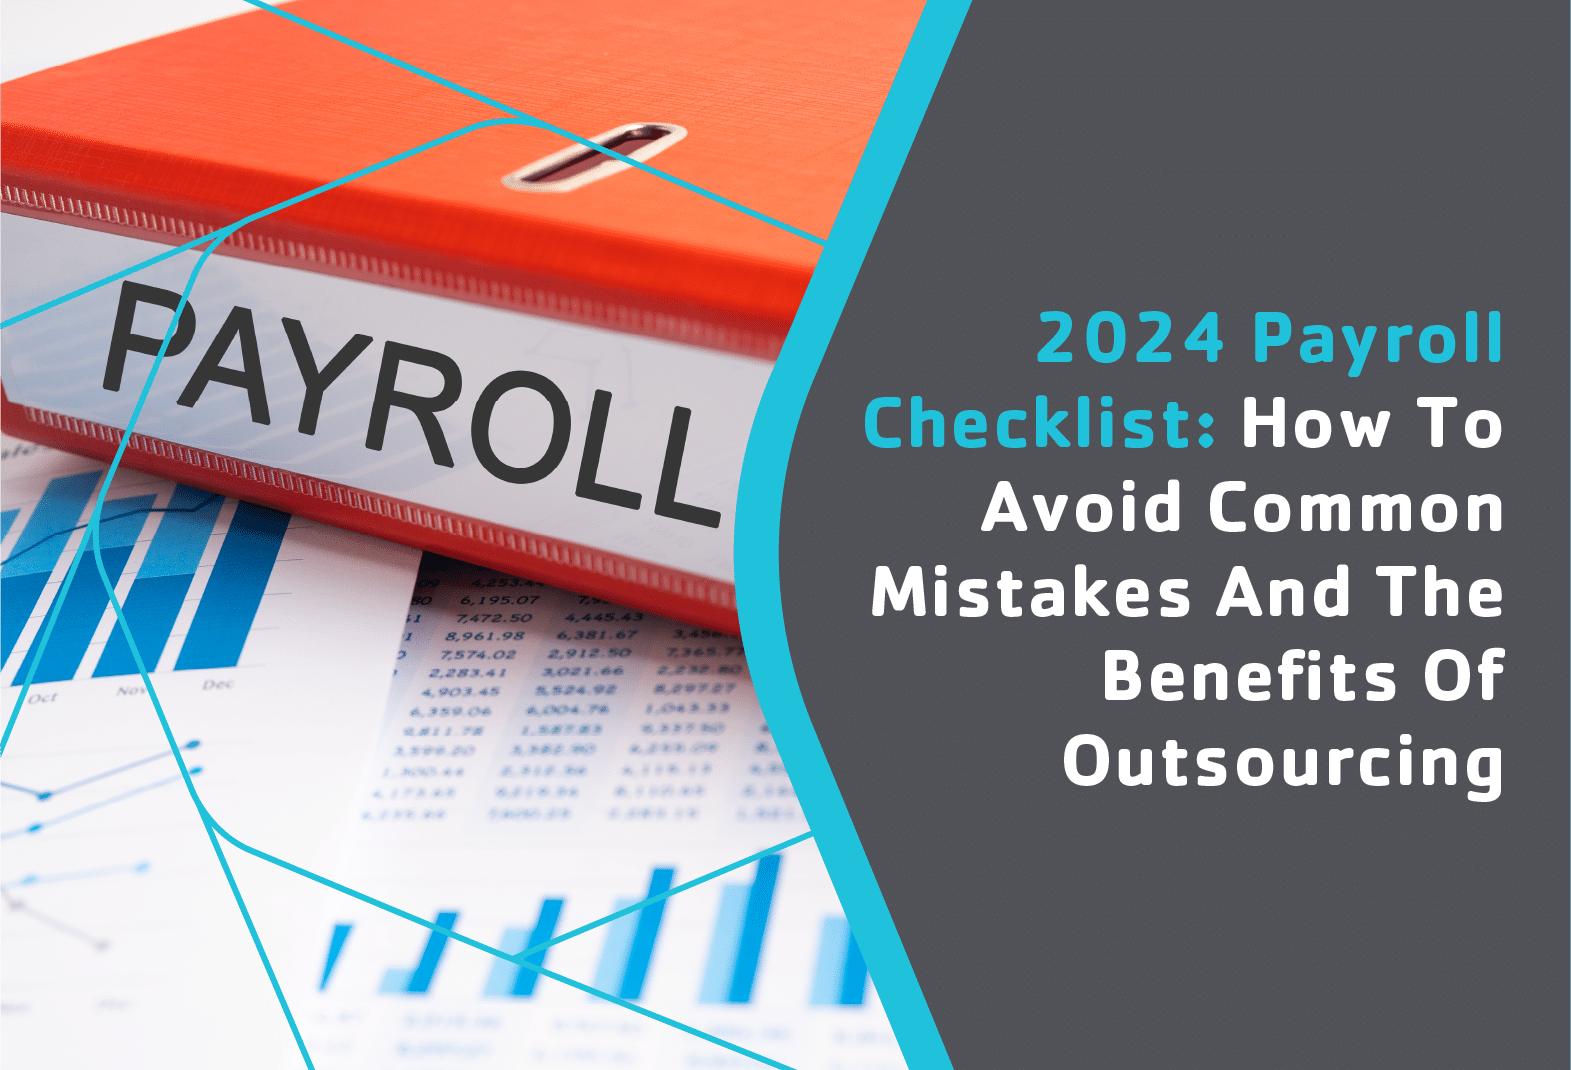 2024 Payroll Checklist: How To Avoid Common Mistakes And The Benefits Of Outsourcing